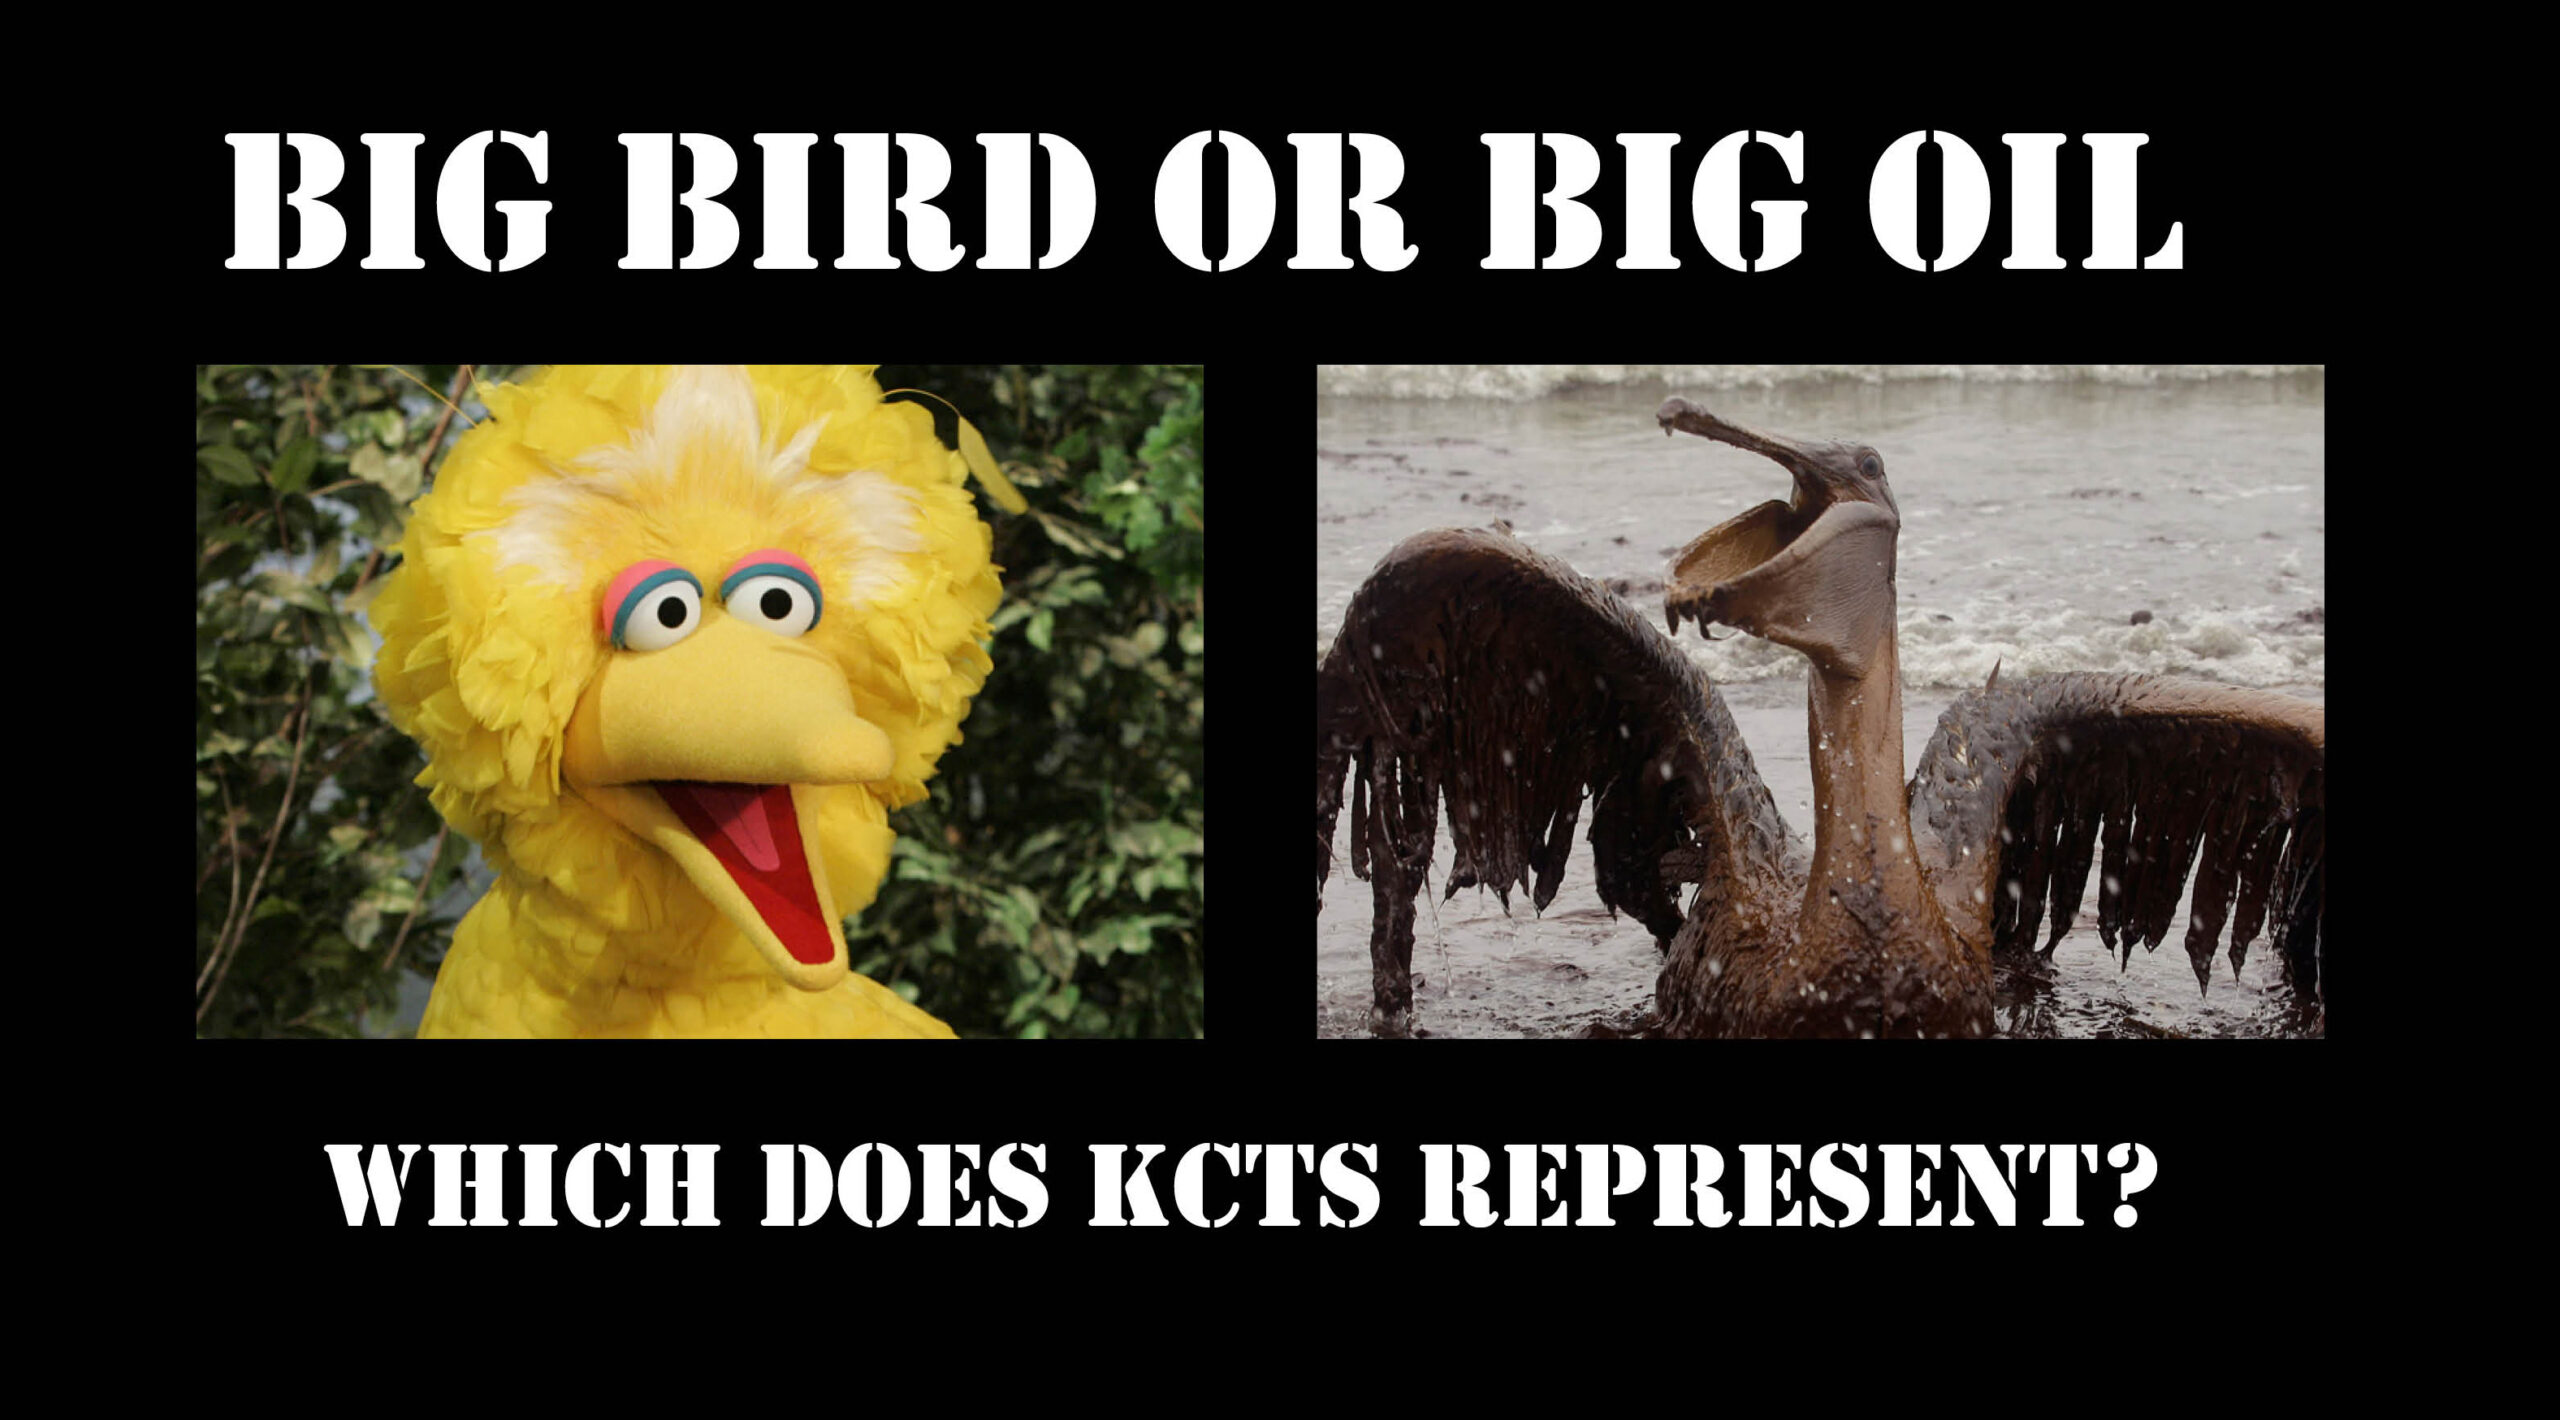 Big Bird or Big Oil: Which does KCTS represent?